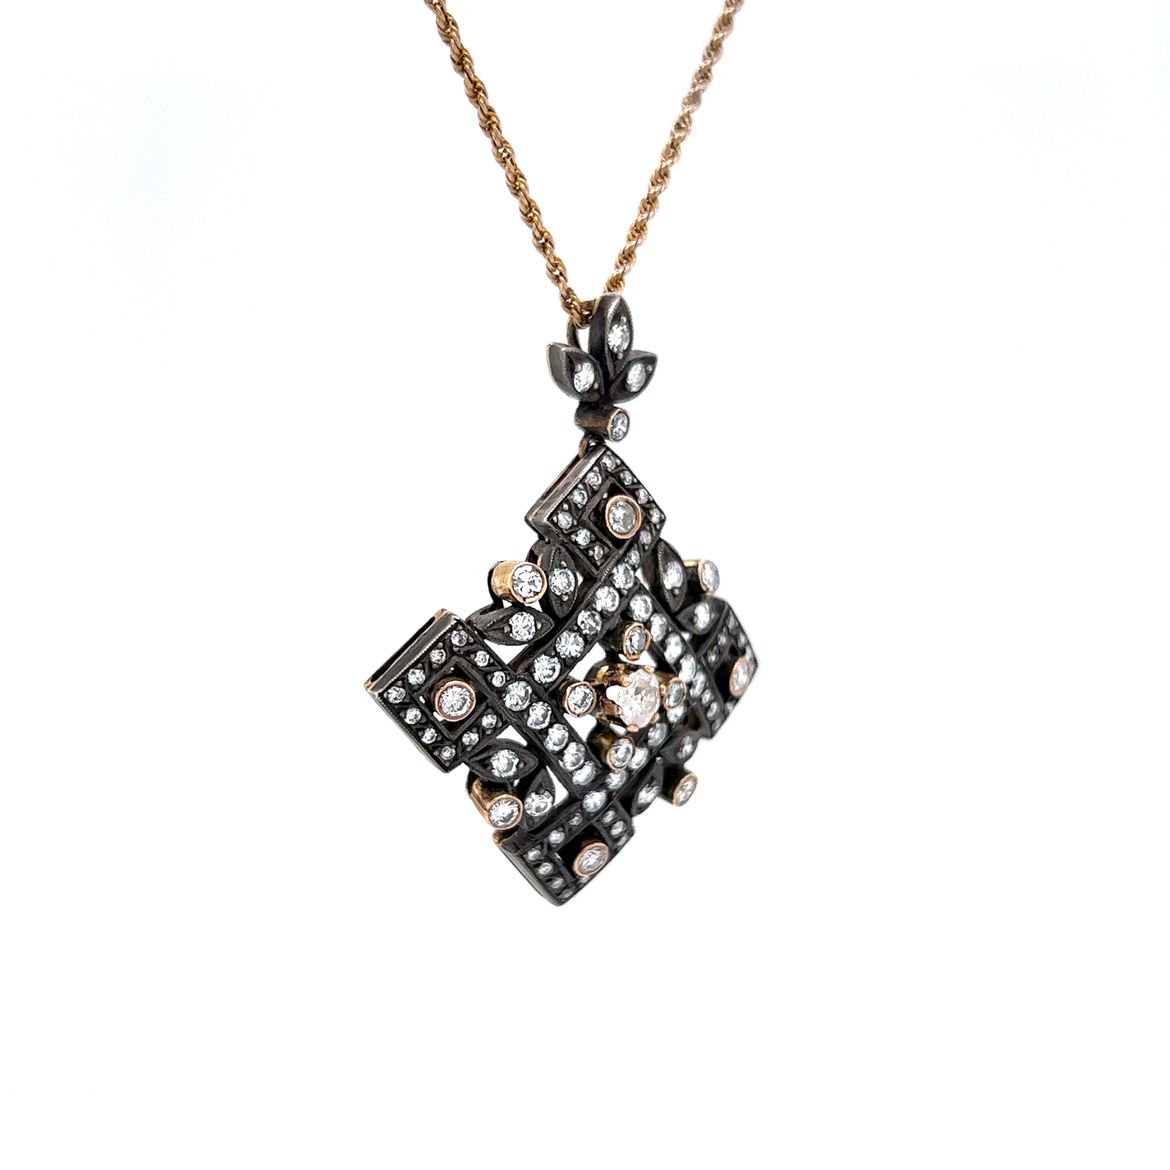 1.50 Carat Diamond Pendant in Yellow Gold & Sterling Silver